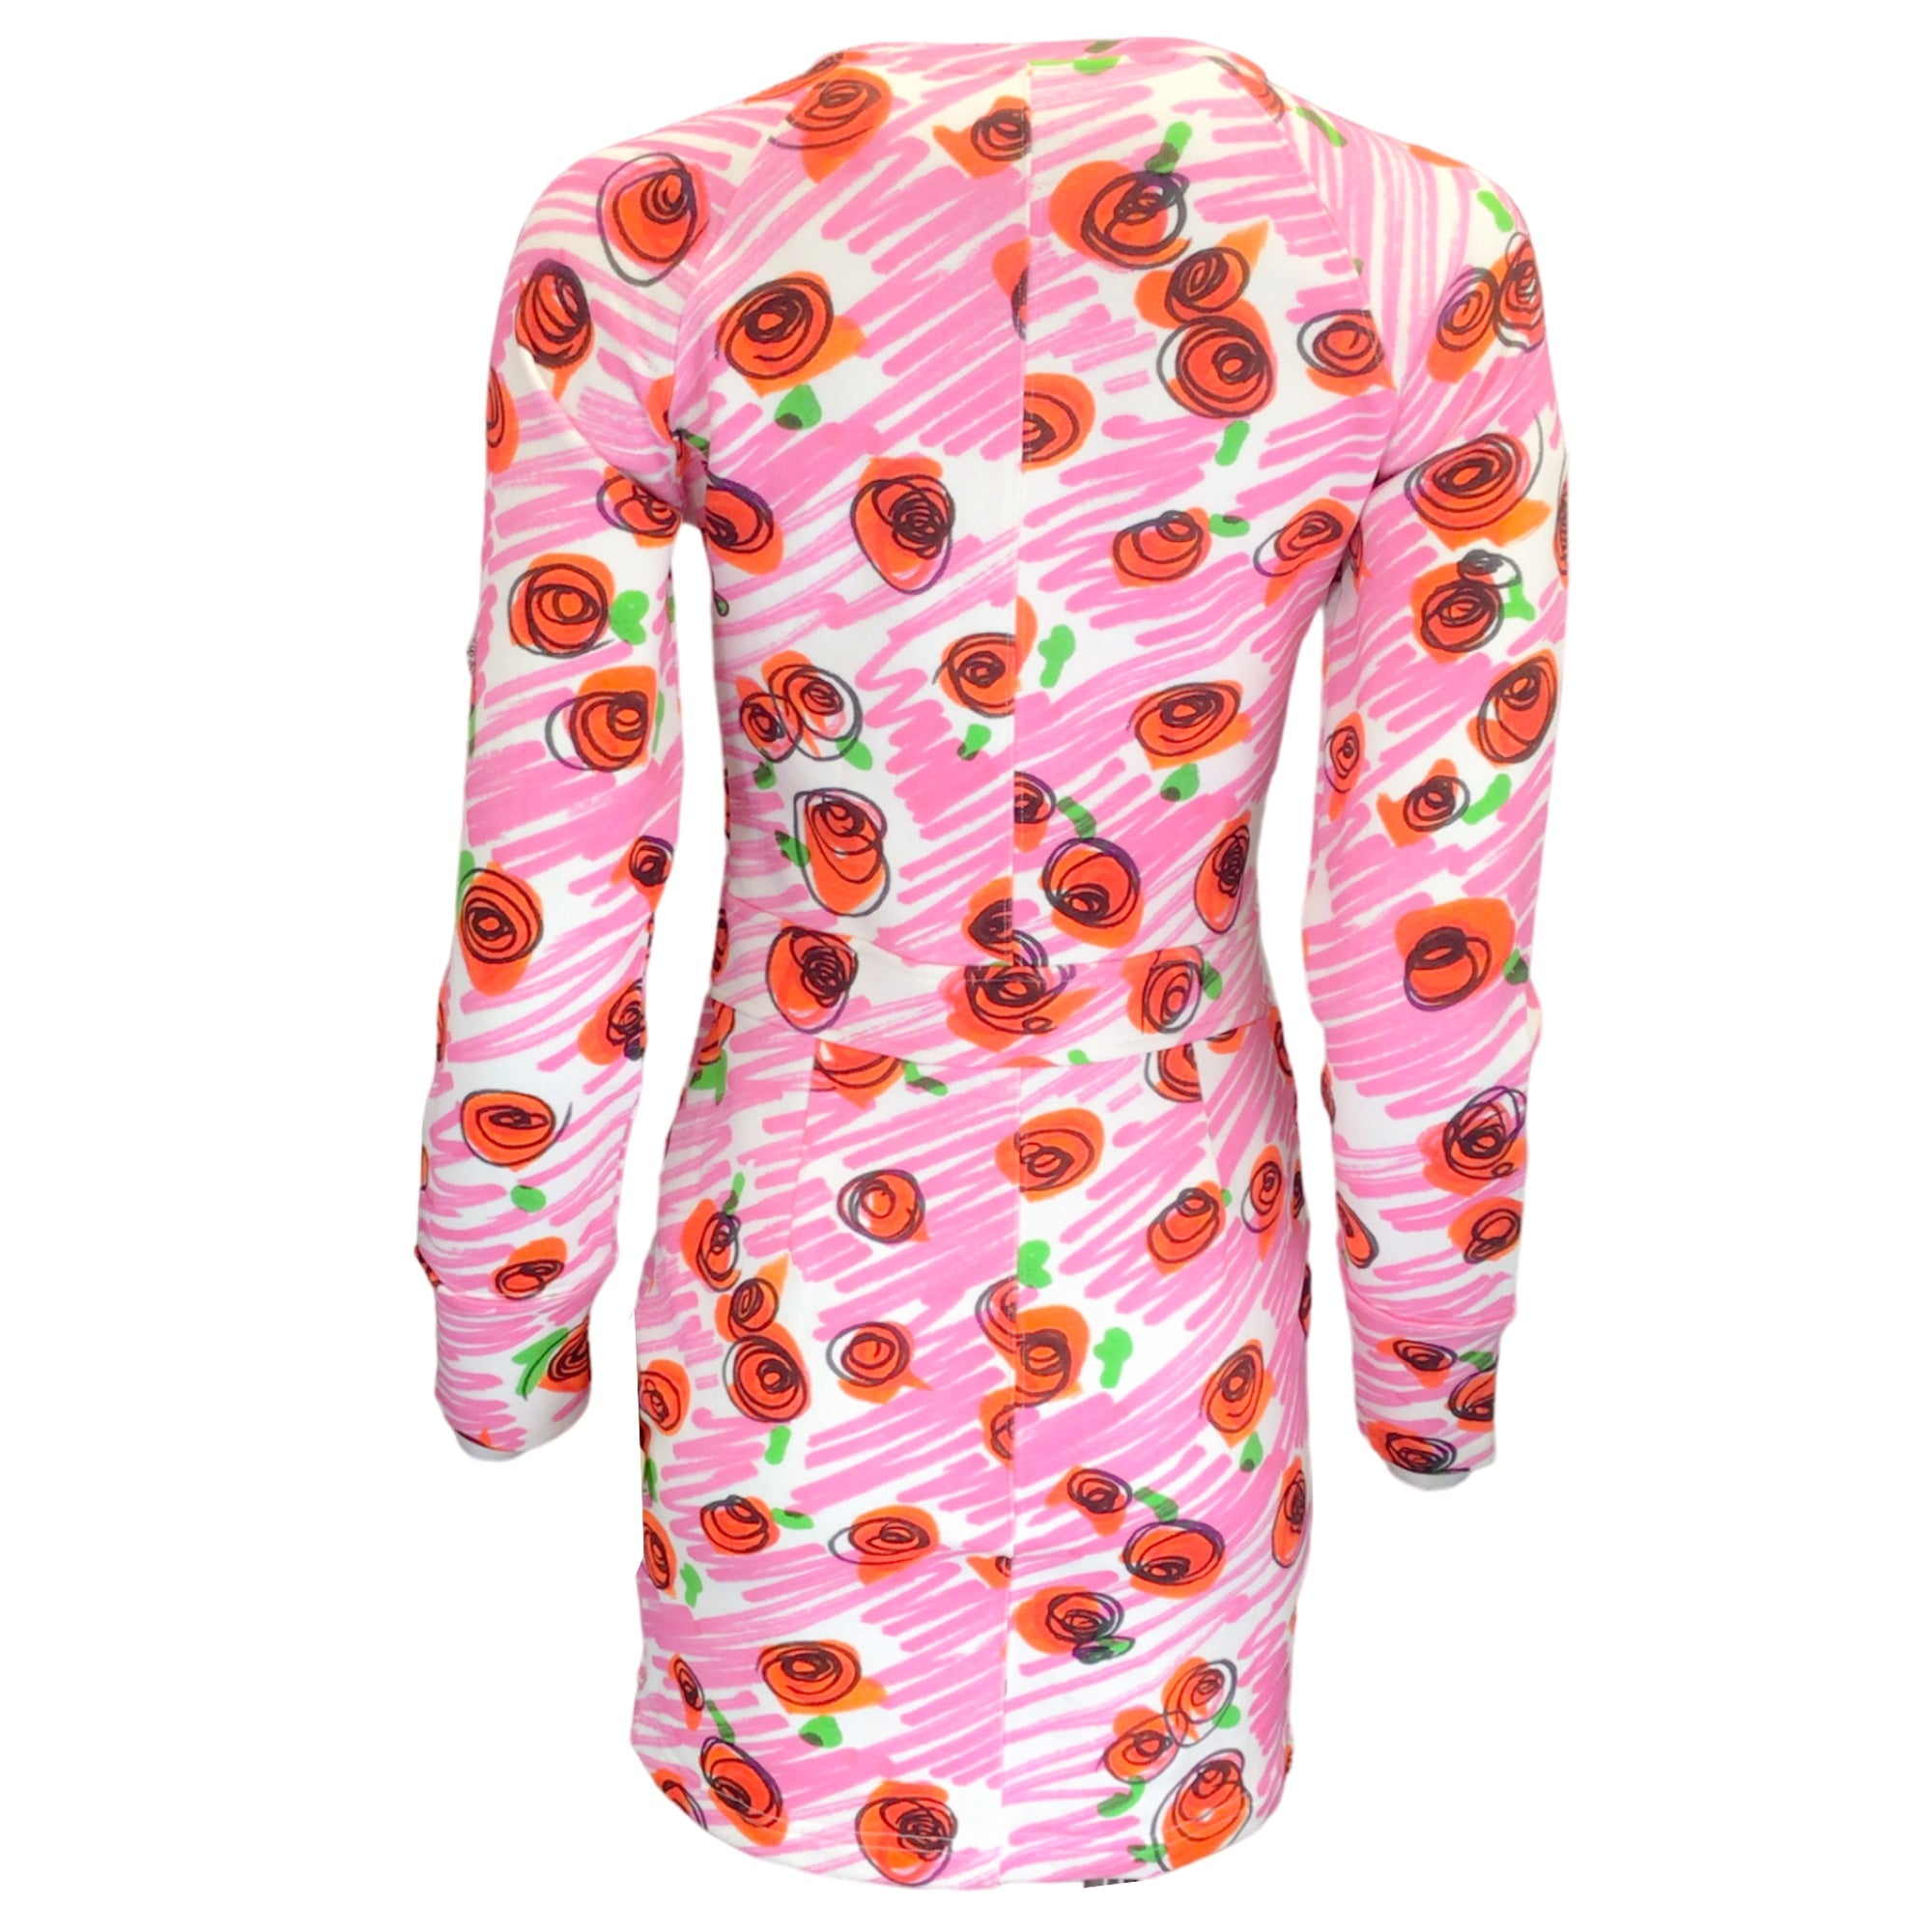 Moschino Couture Pink Multi Floral Printed Cotton Sweatshirt Dress